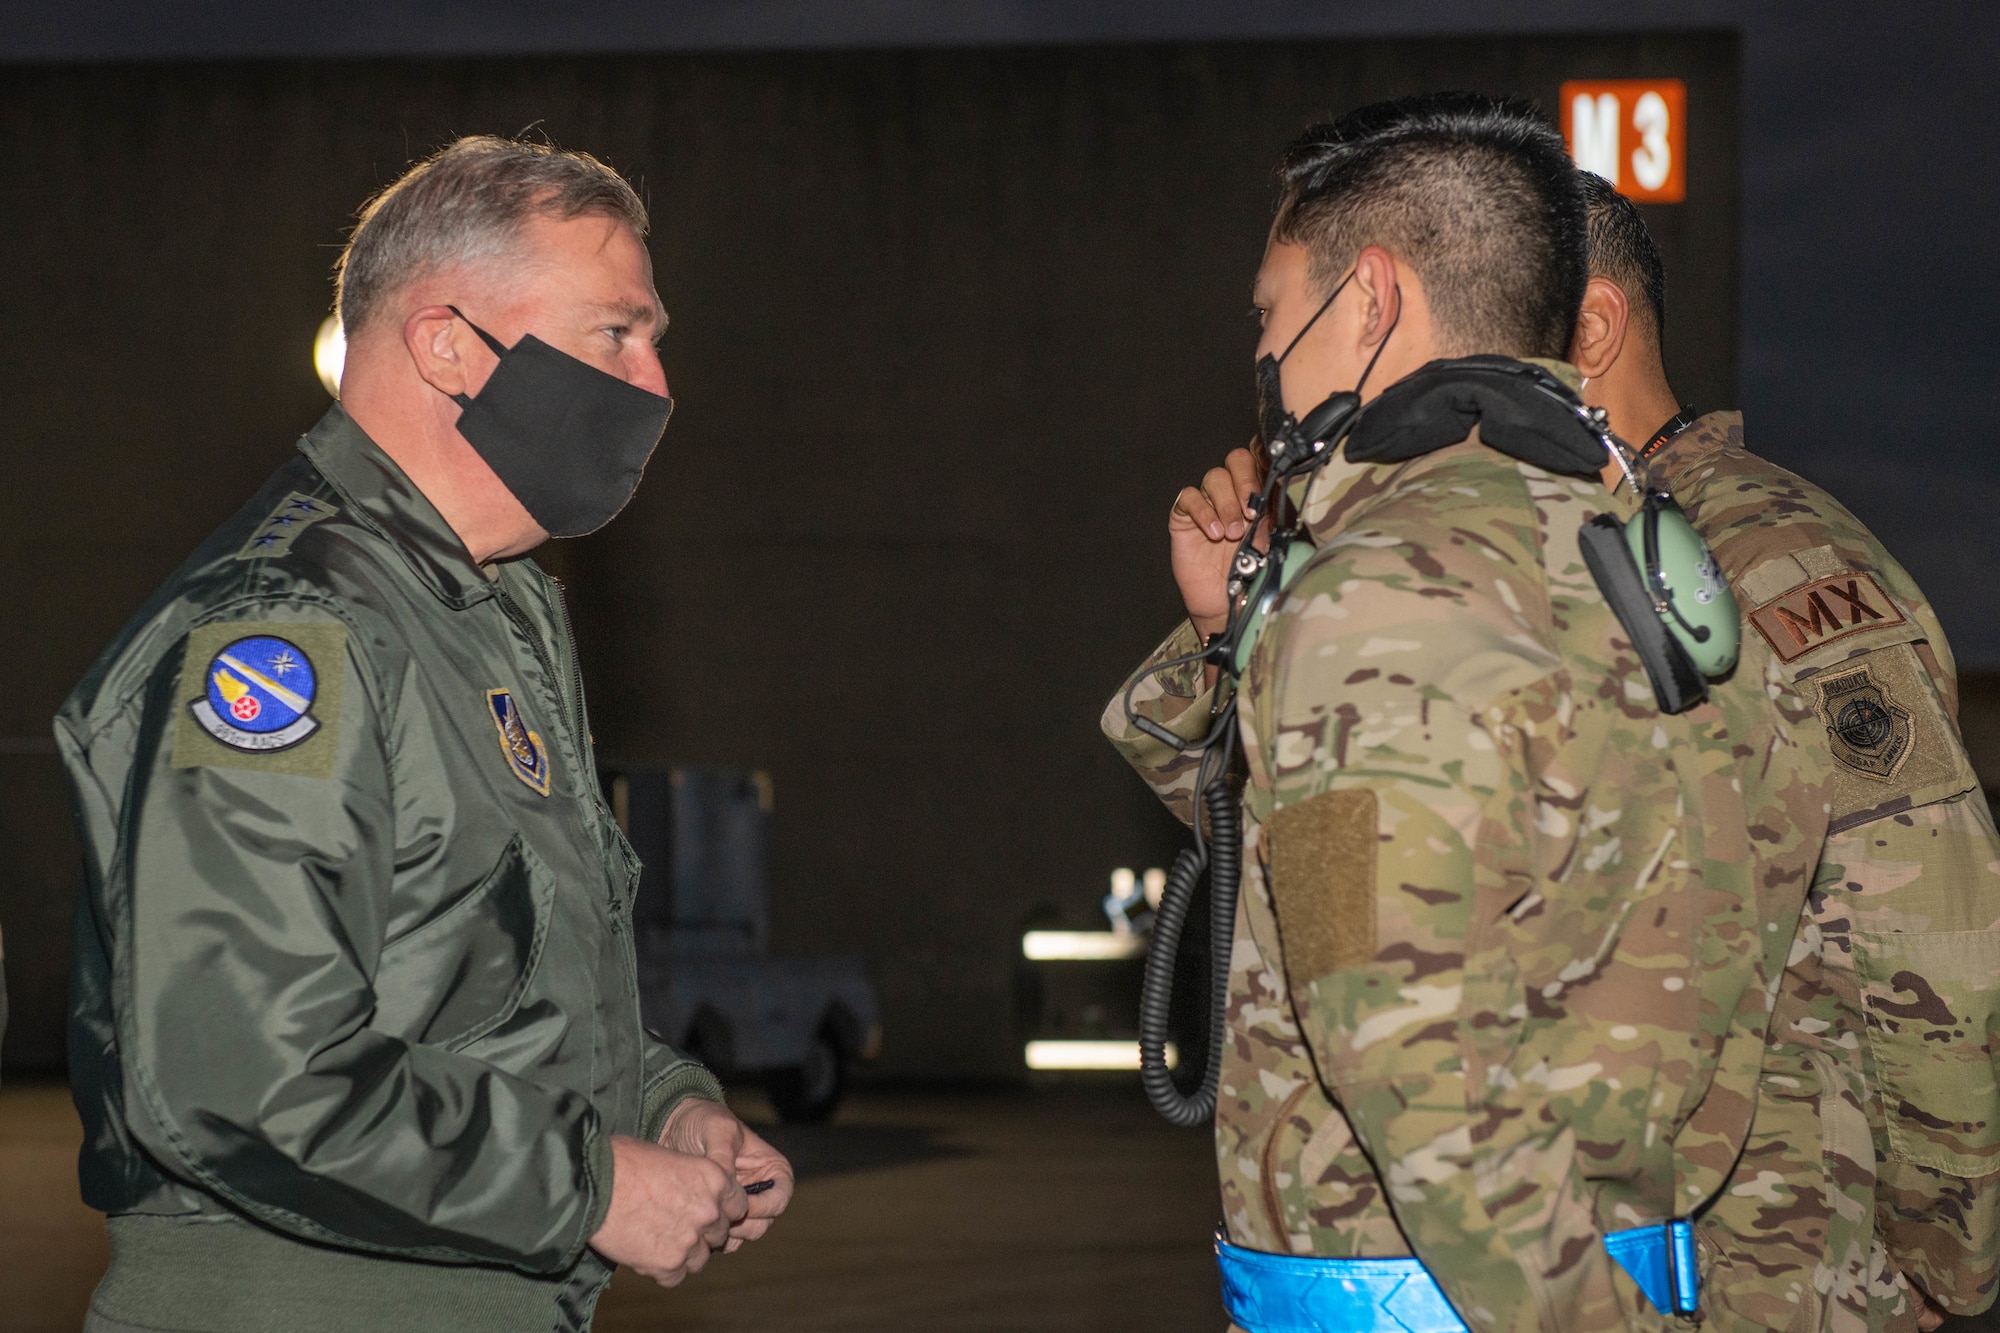 A general receives a patch from a military member